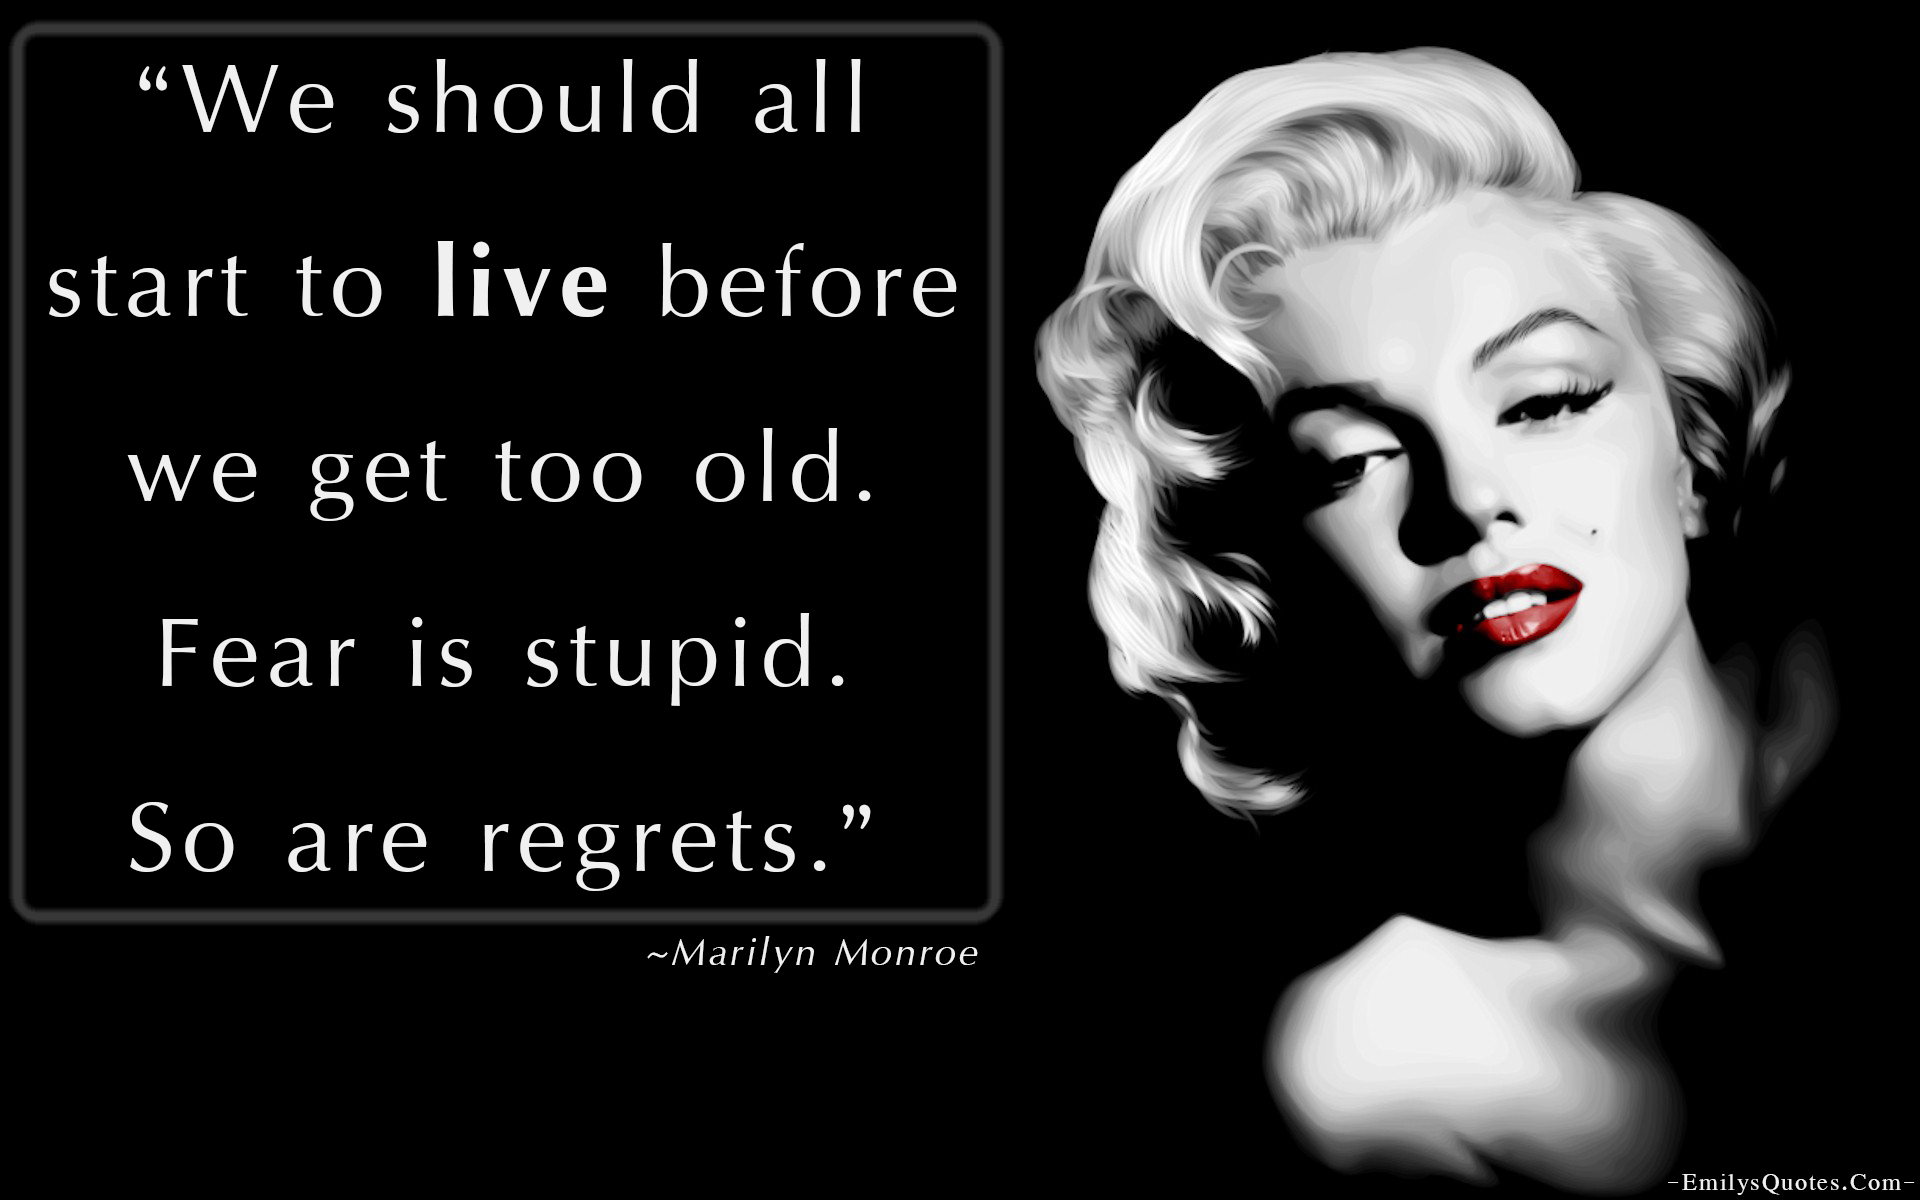 We should all start to live before we get too old. Fear is stupid. So are regrets